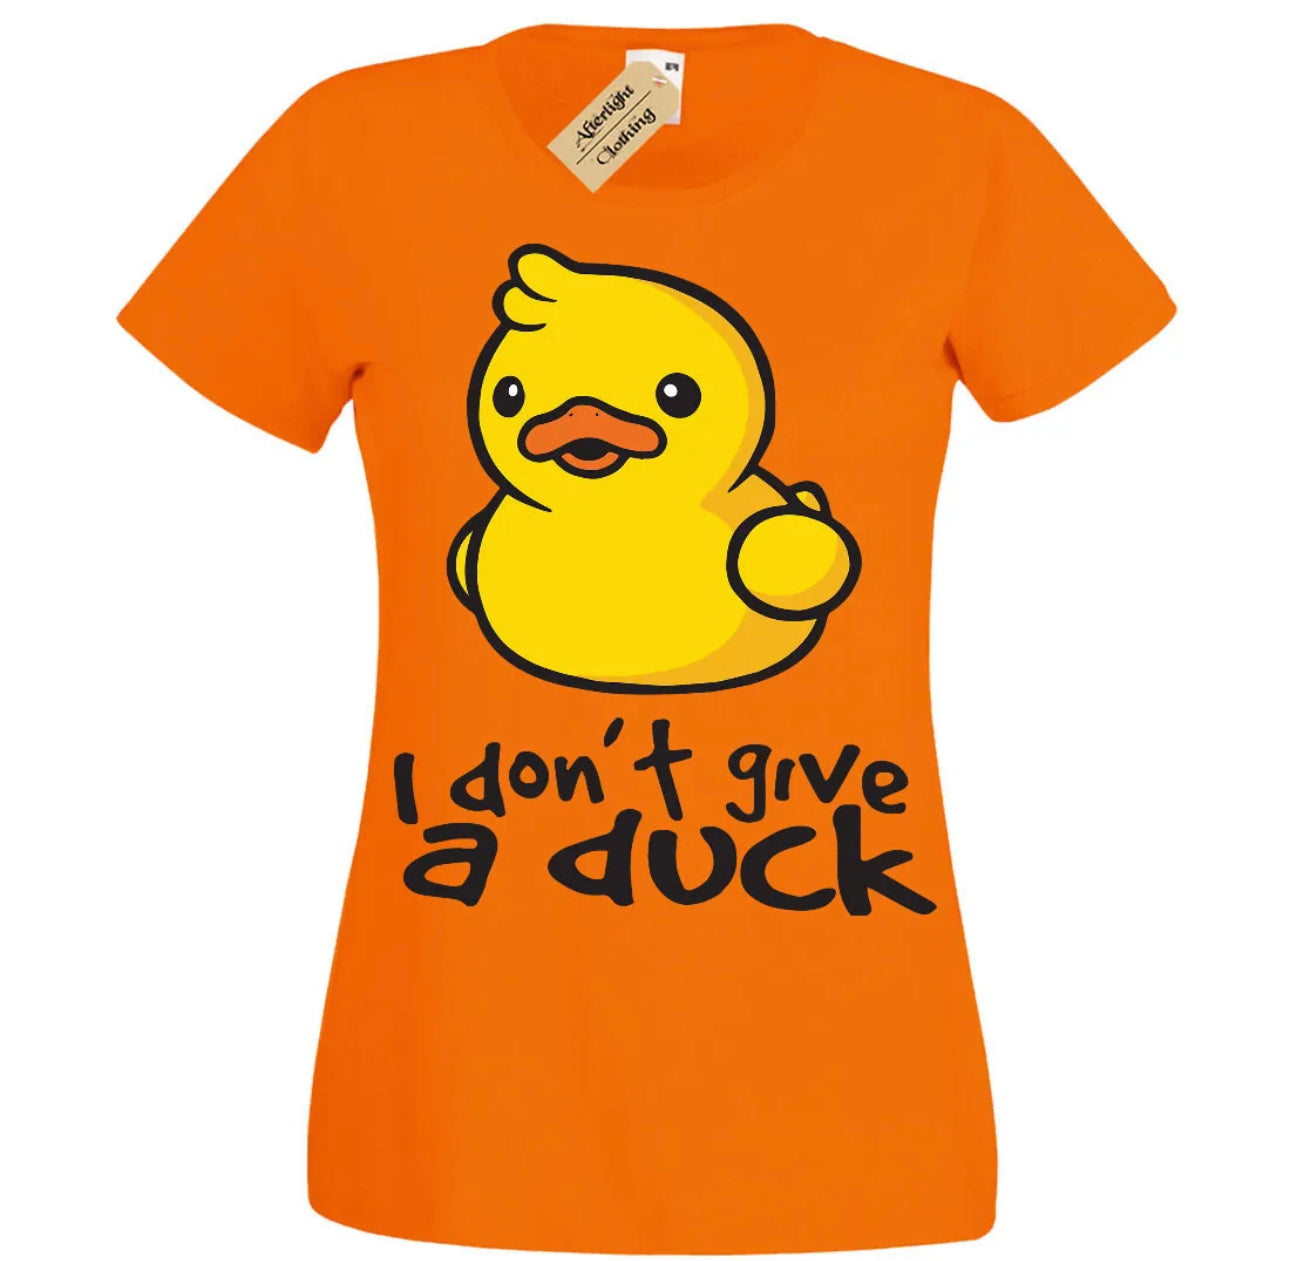 I don’t give a duck - women’s funny T-shirt